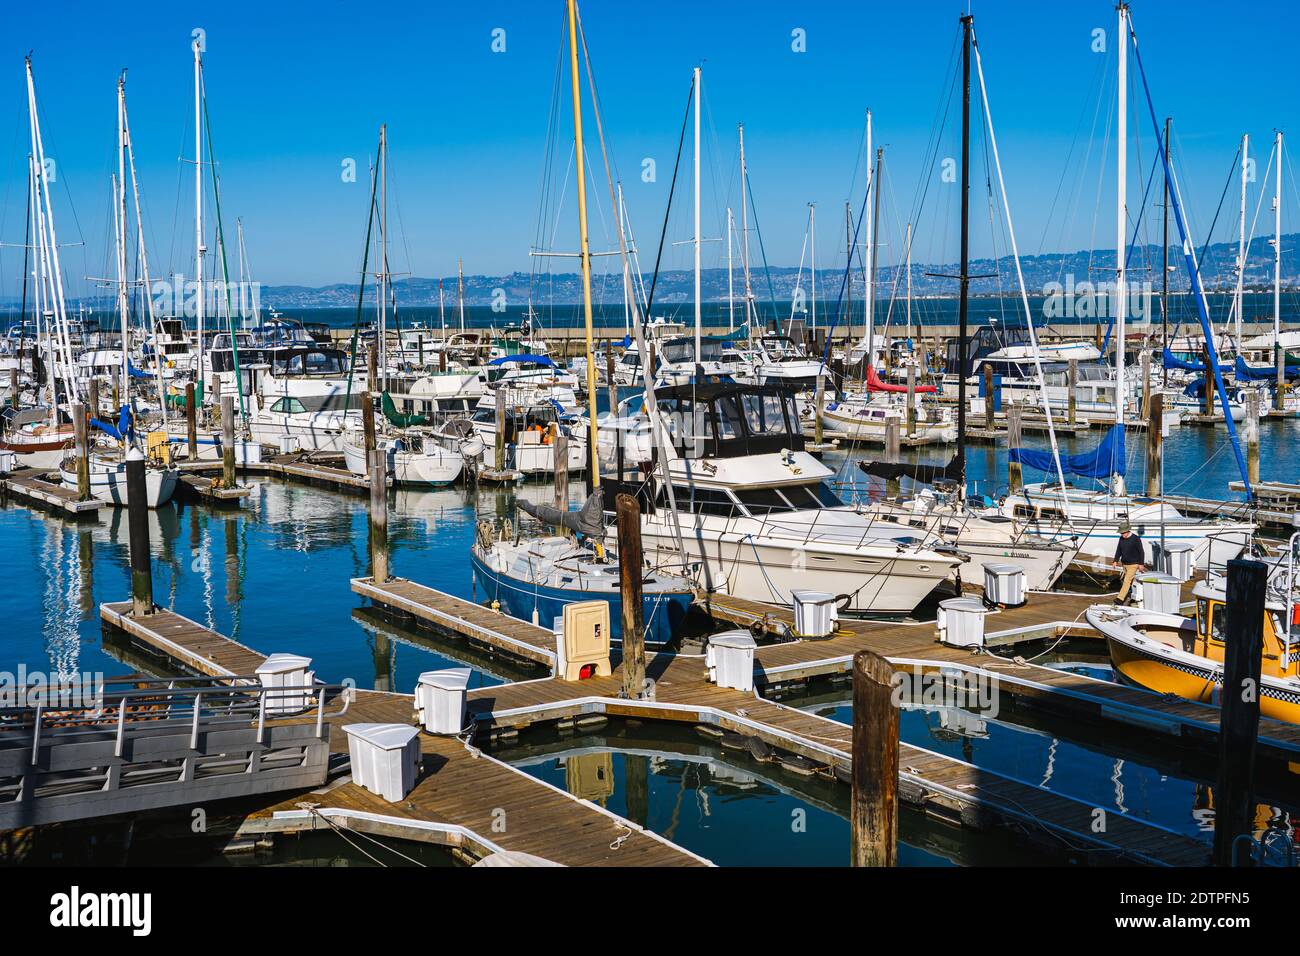 Pier 39 houses 300 double-fingered wooden dock boat slips available for long-term rental, day stays, and overnight guest docking. Stock Photo